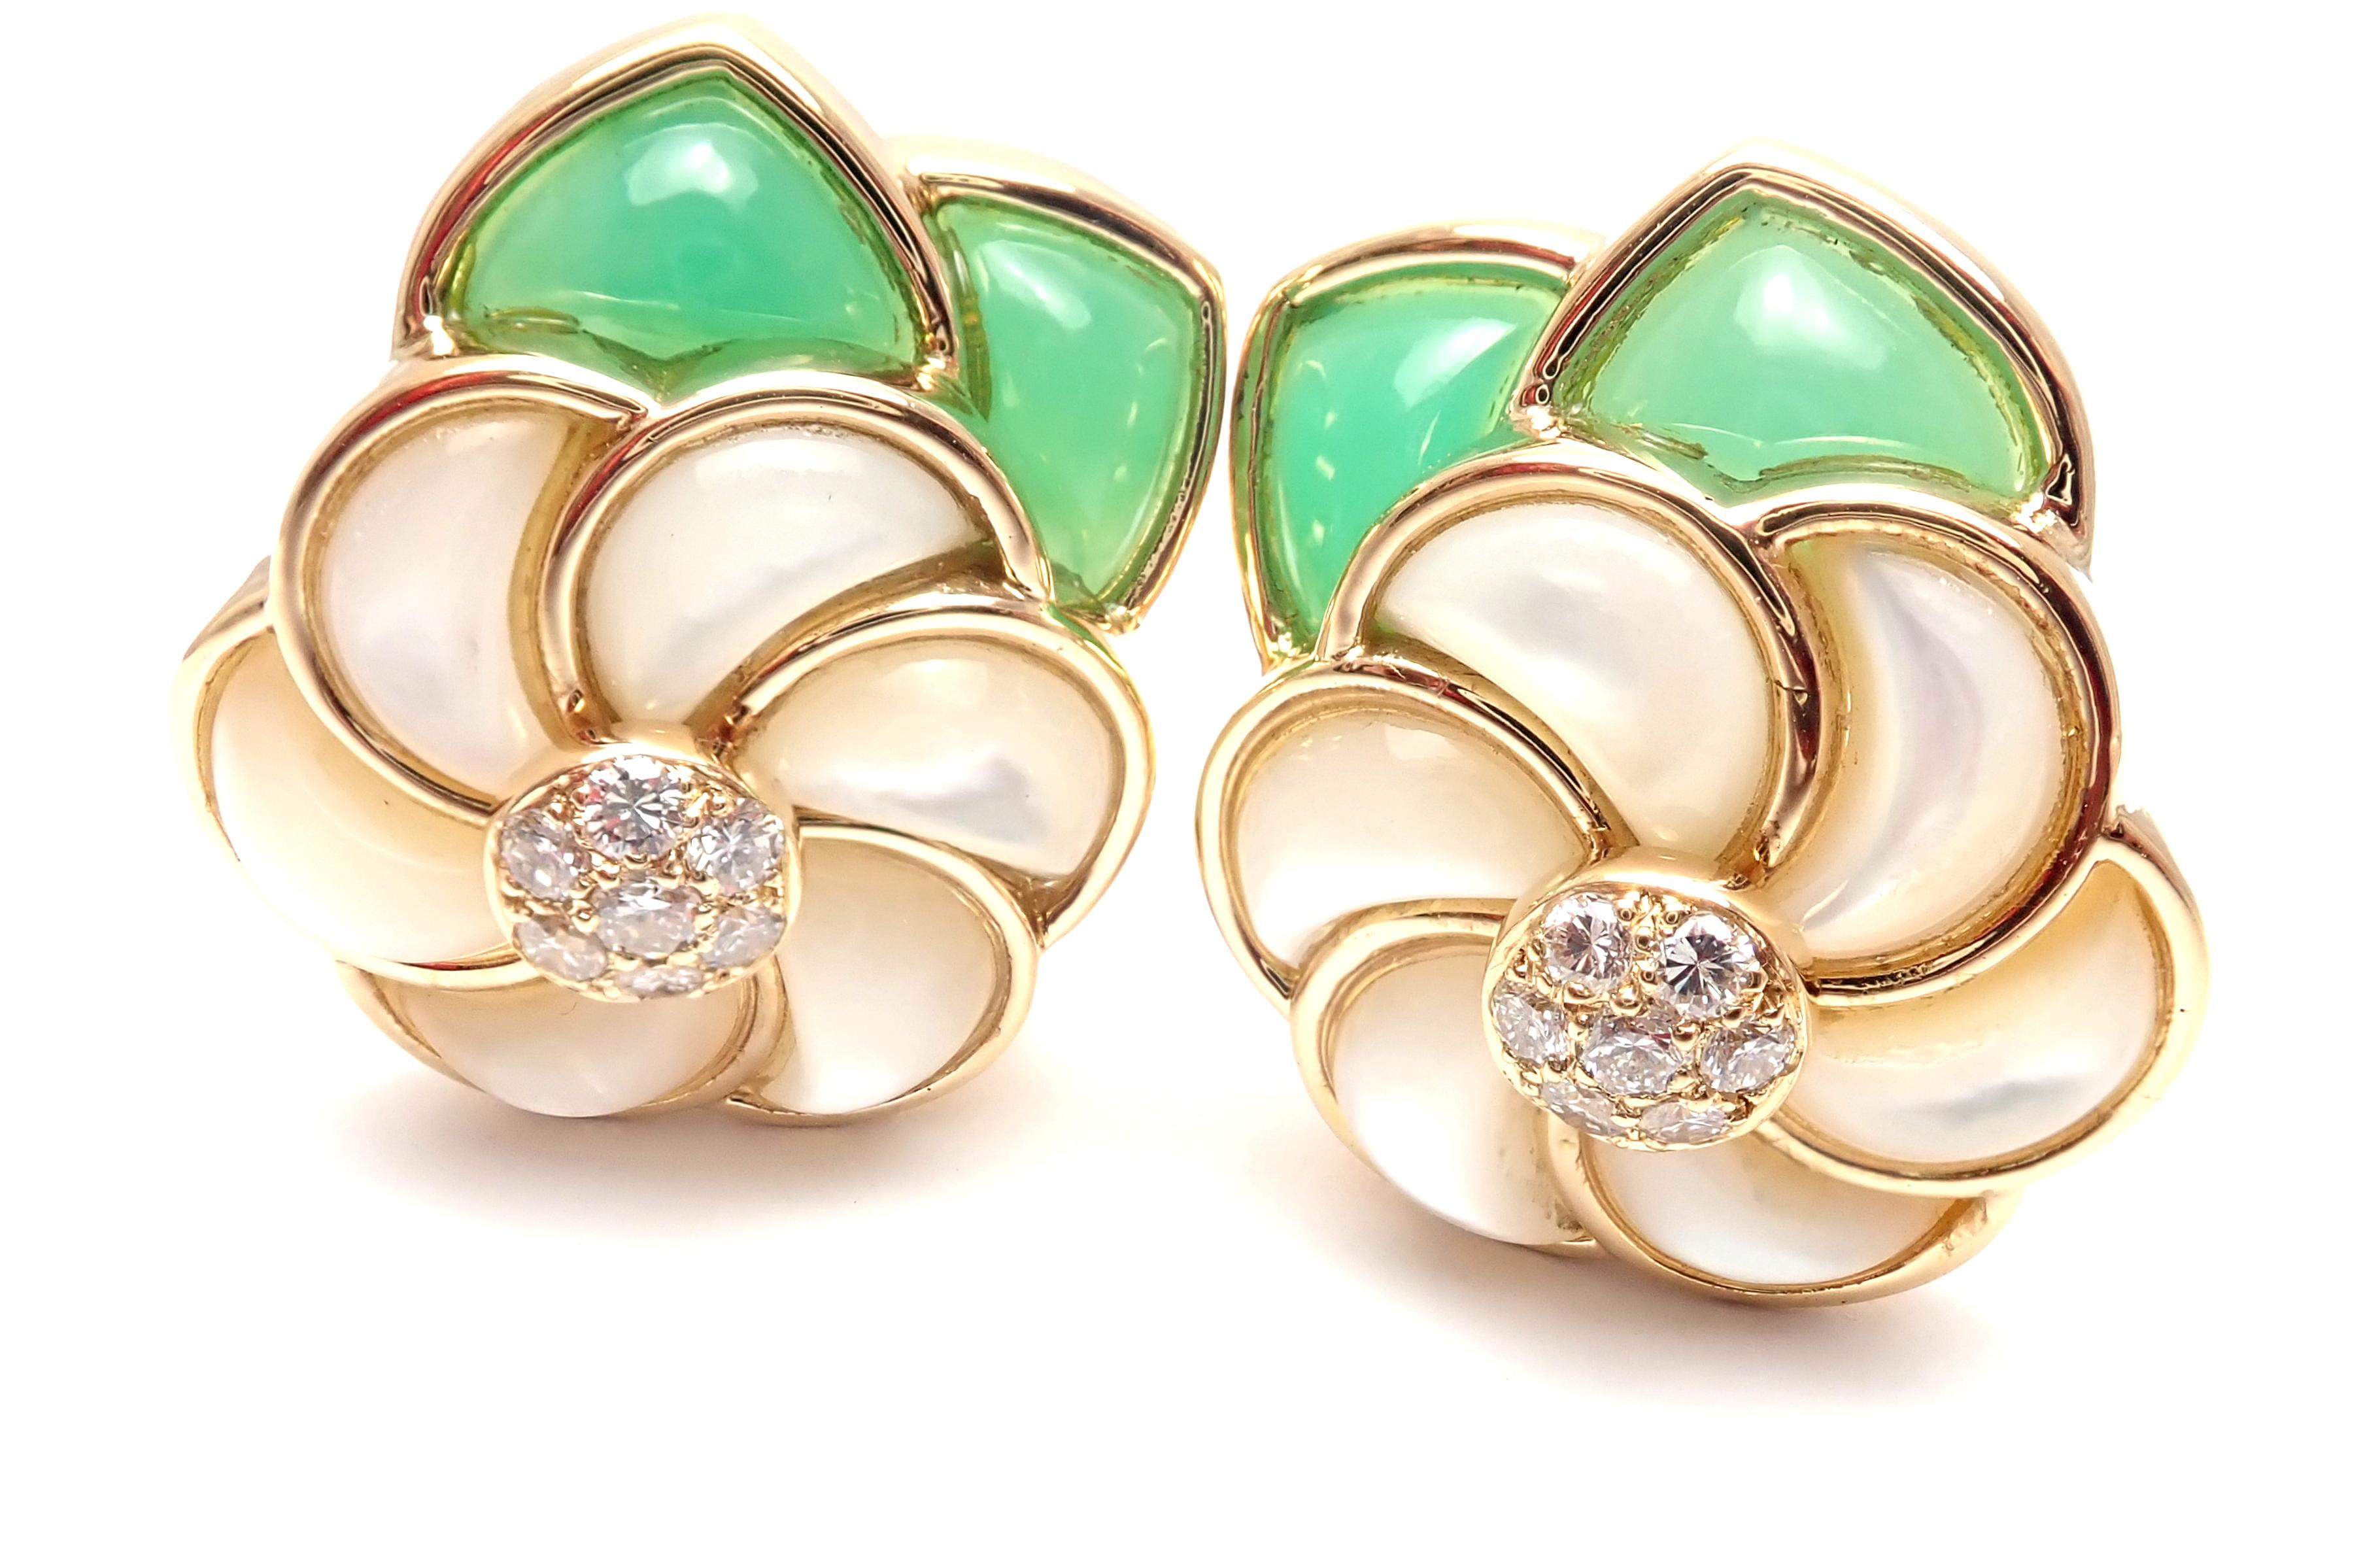 18k Yellow Gold Mother Of Pearl Chrysoprase Diamond Flower Earrings by Van Cleef & Arpels. 
These earrings are clips, made for non pierced ears, but they could be converted by adding posts.
With 14 round brilliant cut diamonds VVS1 clarity, E color